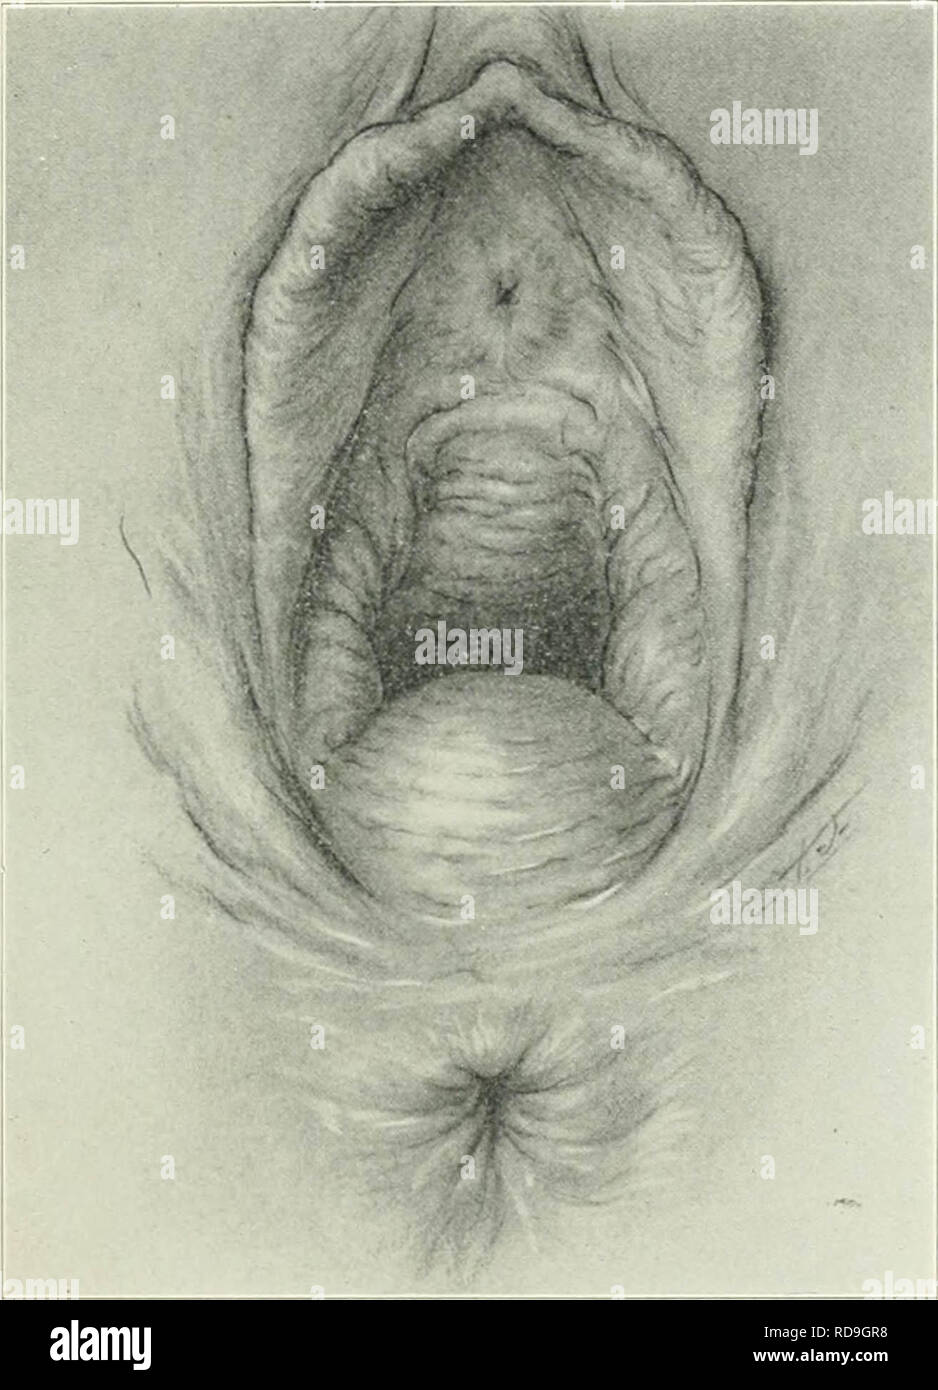 'American journal of obstetrics and gynecology' (1920) Stock Photo